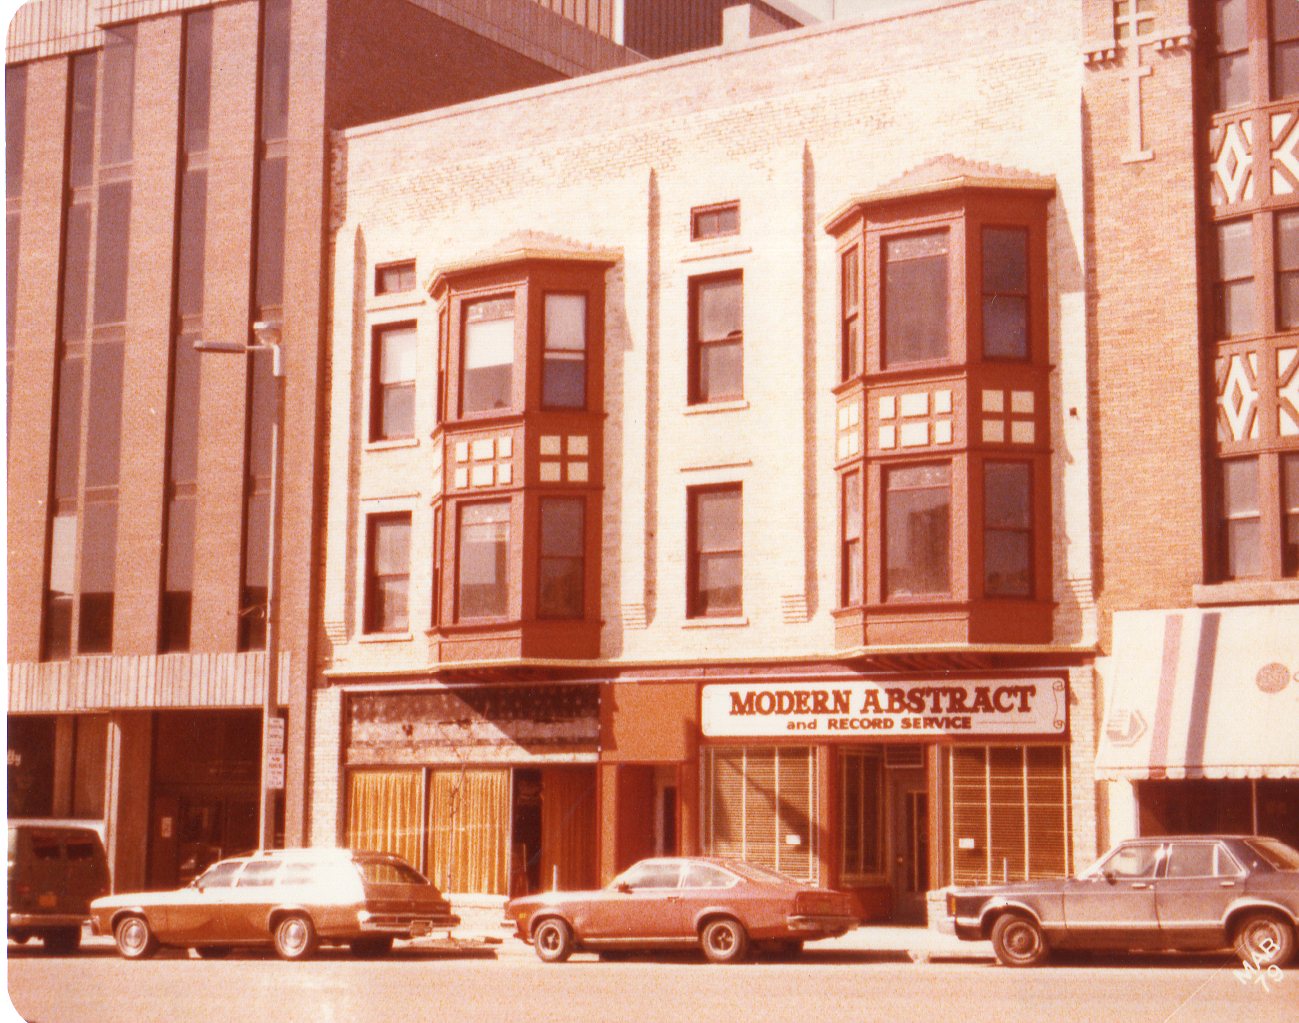 Vintage photograph of the Ryan Building.